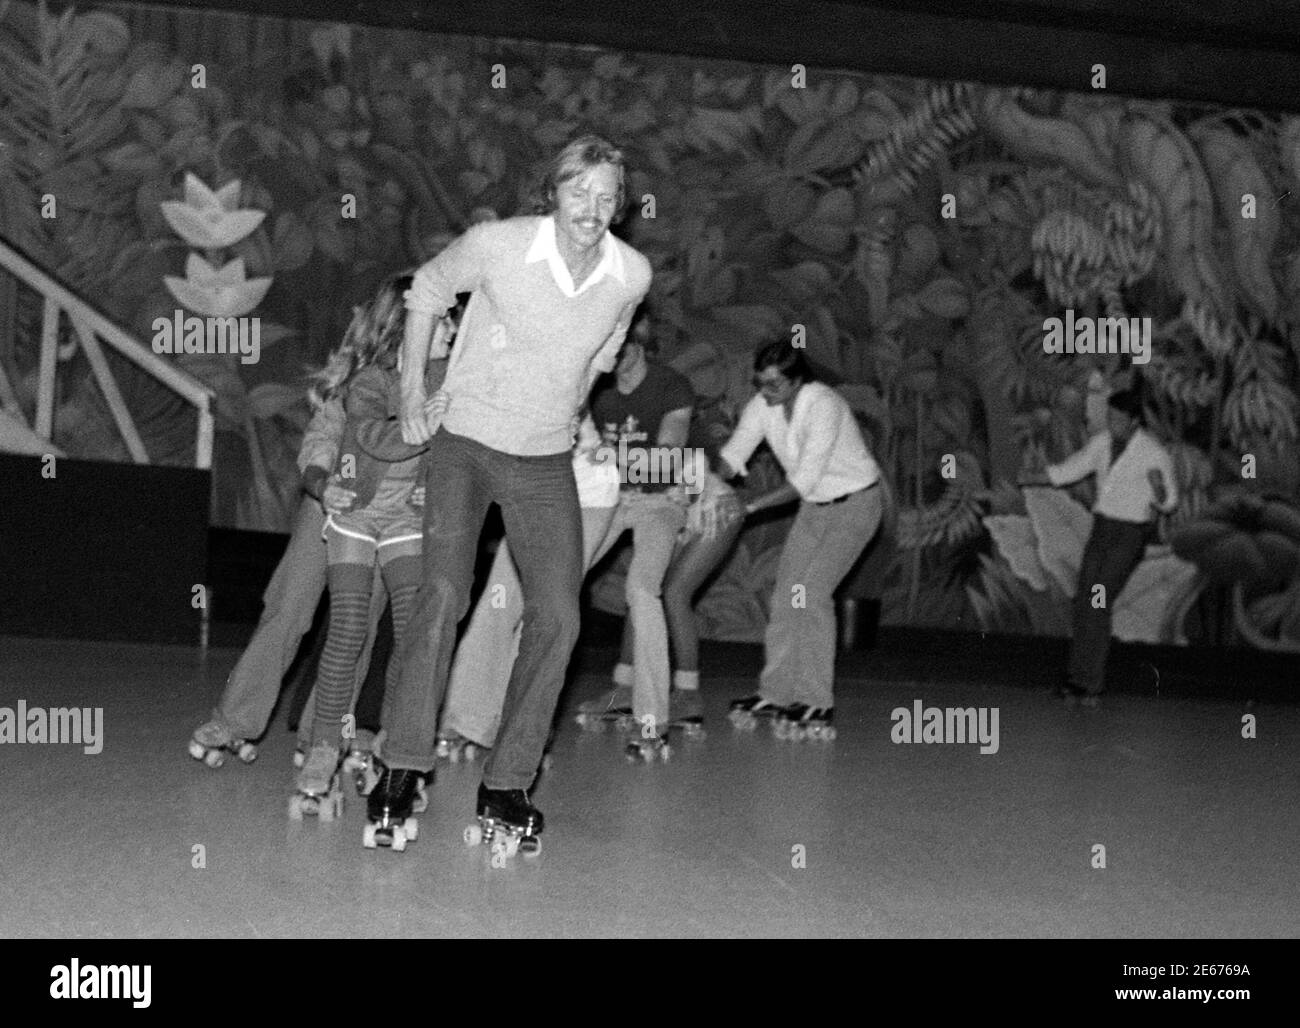 Jon Voigt at Flippers Roller Rink  for event in support of ERA, Los Angeles, OCt. 29, 1978 Stock Photo